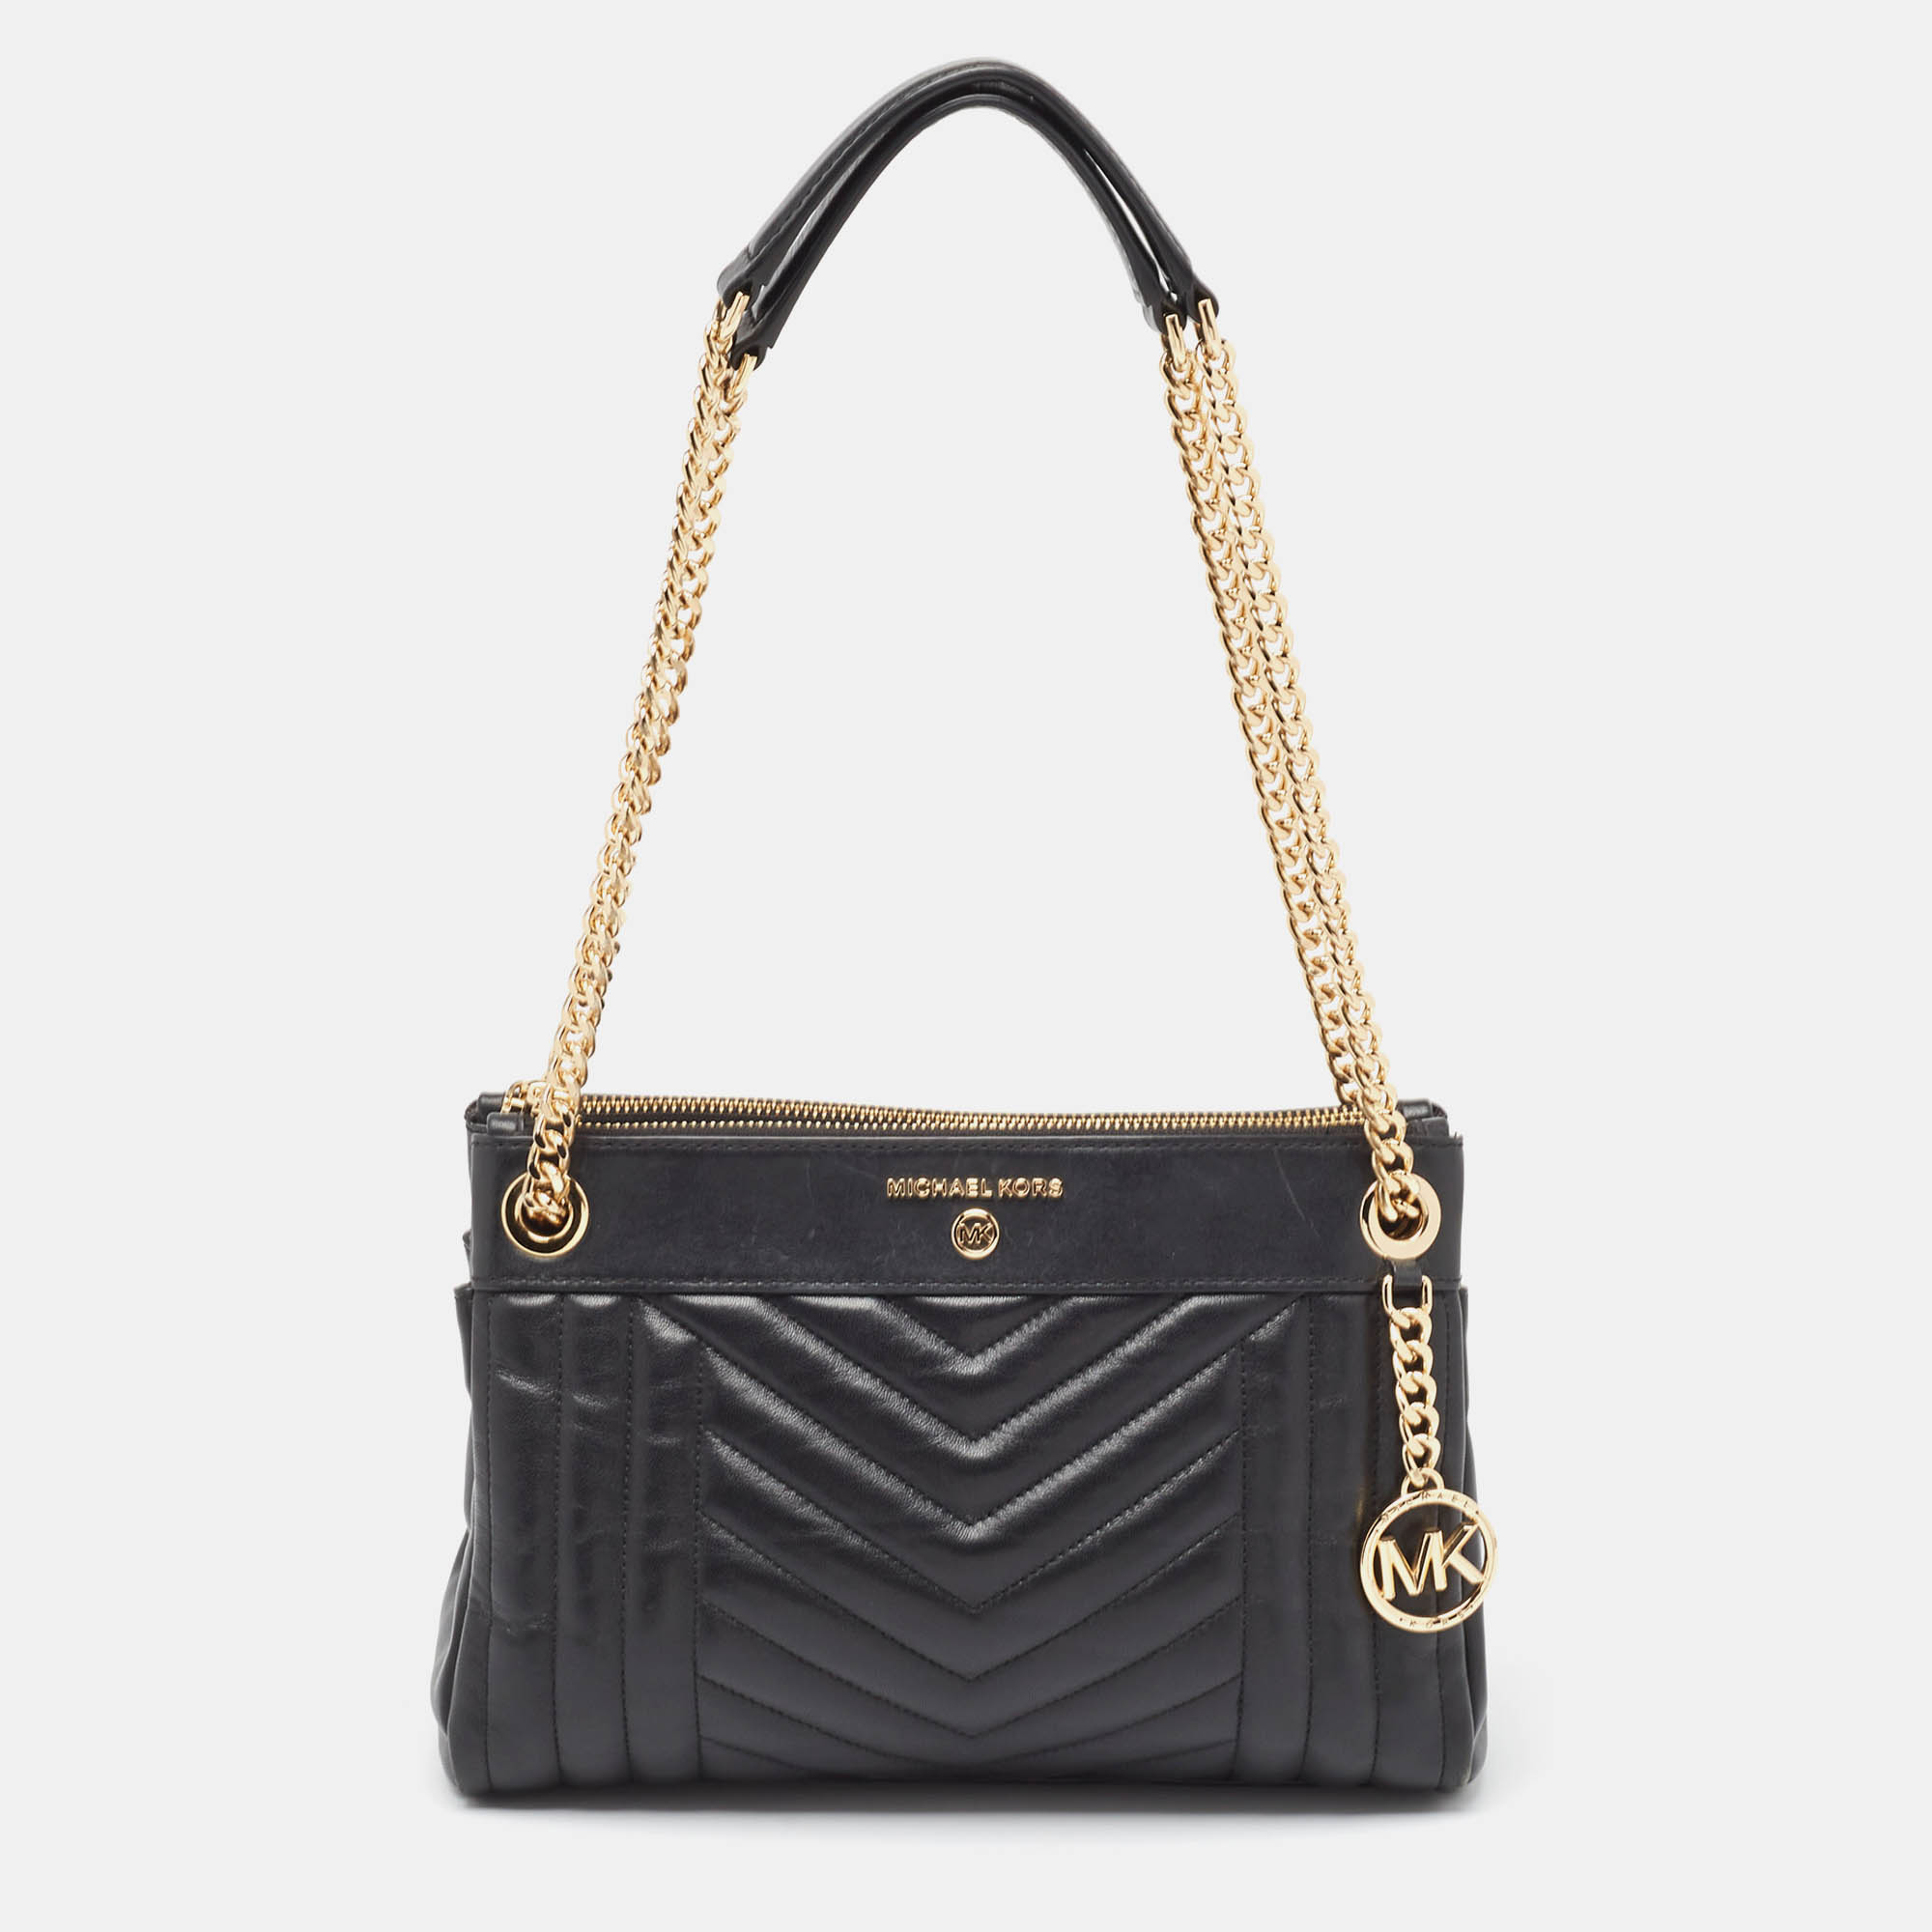 Michael kors black quilted leather susan chain bag